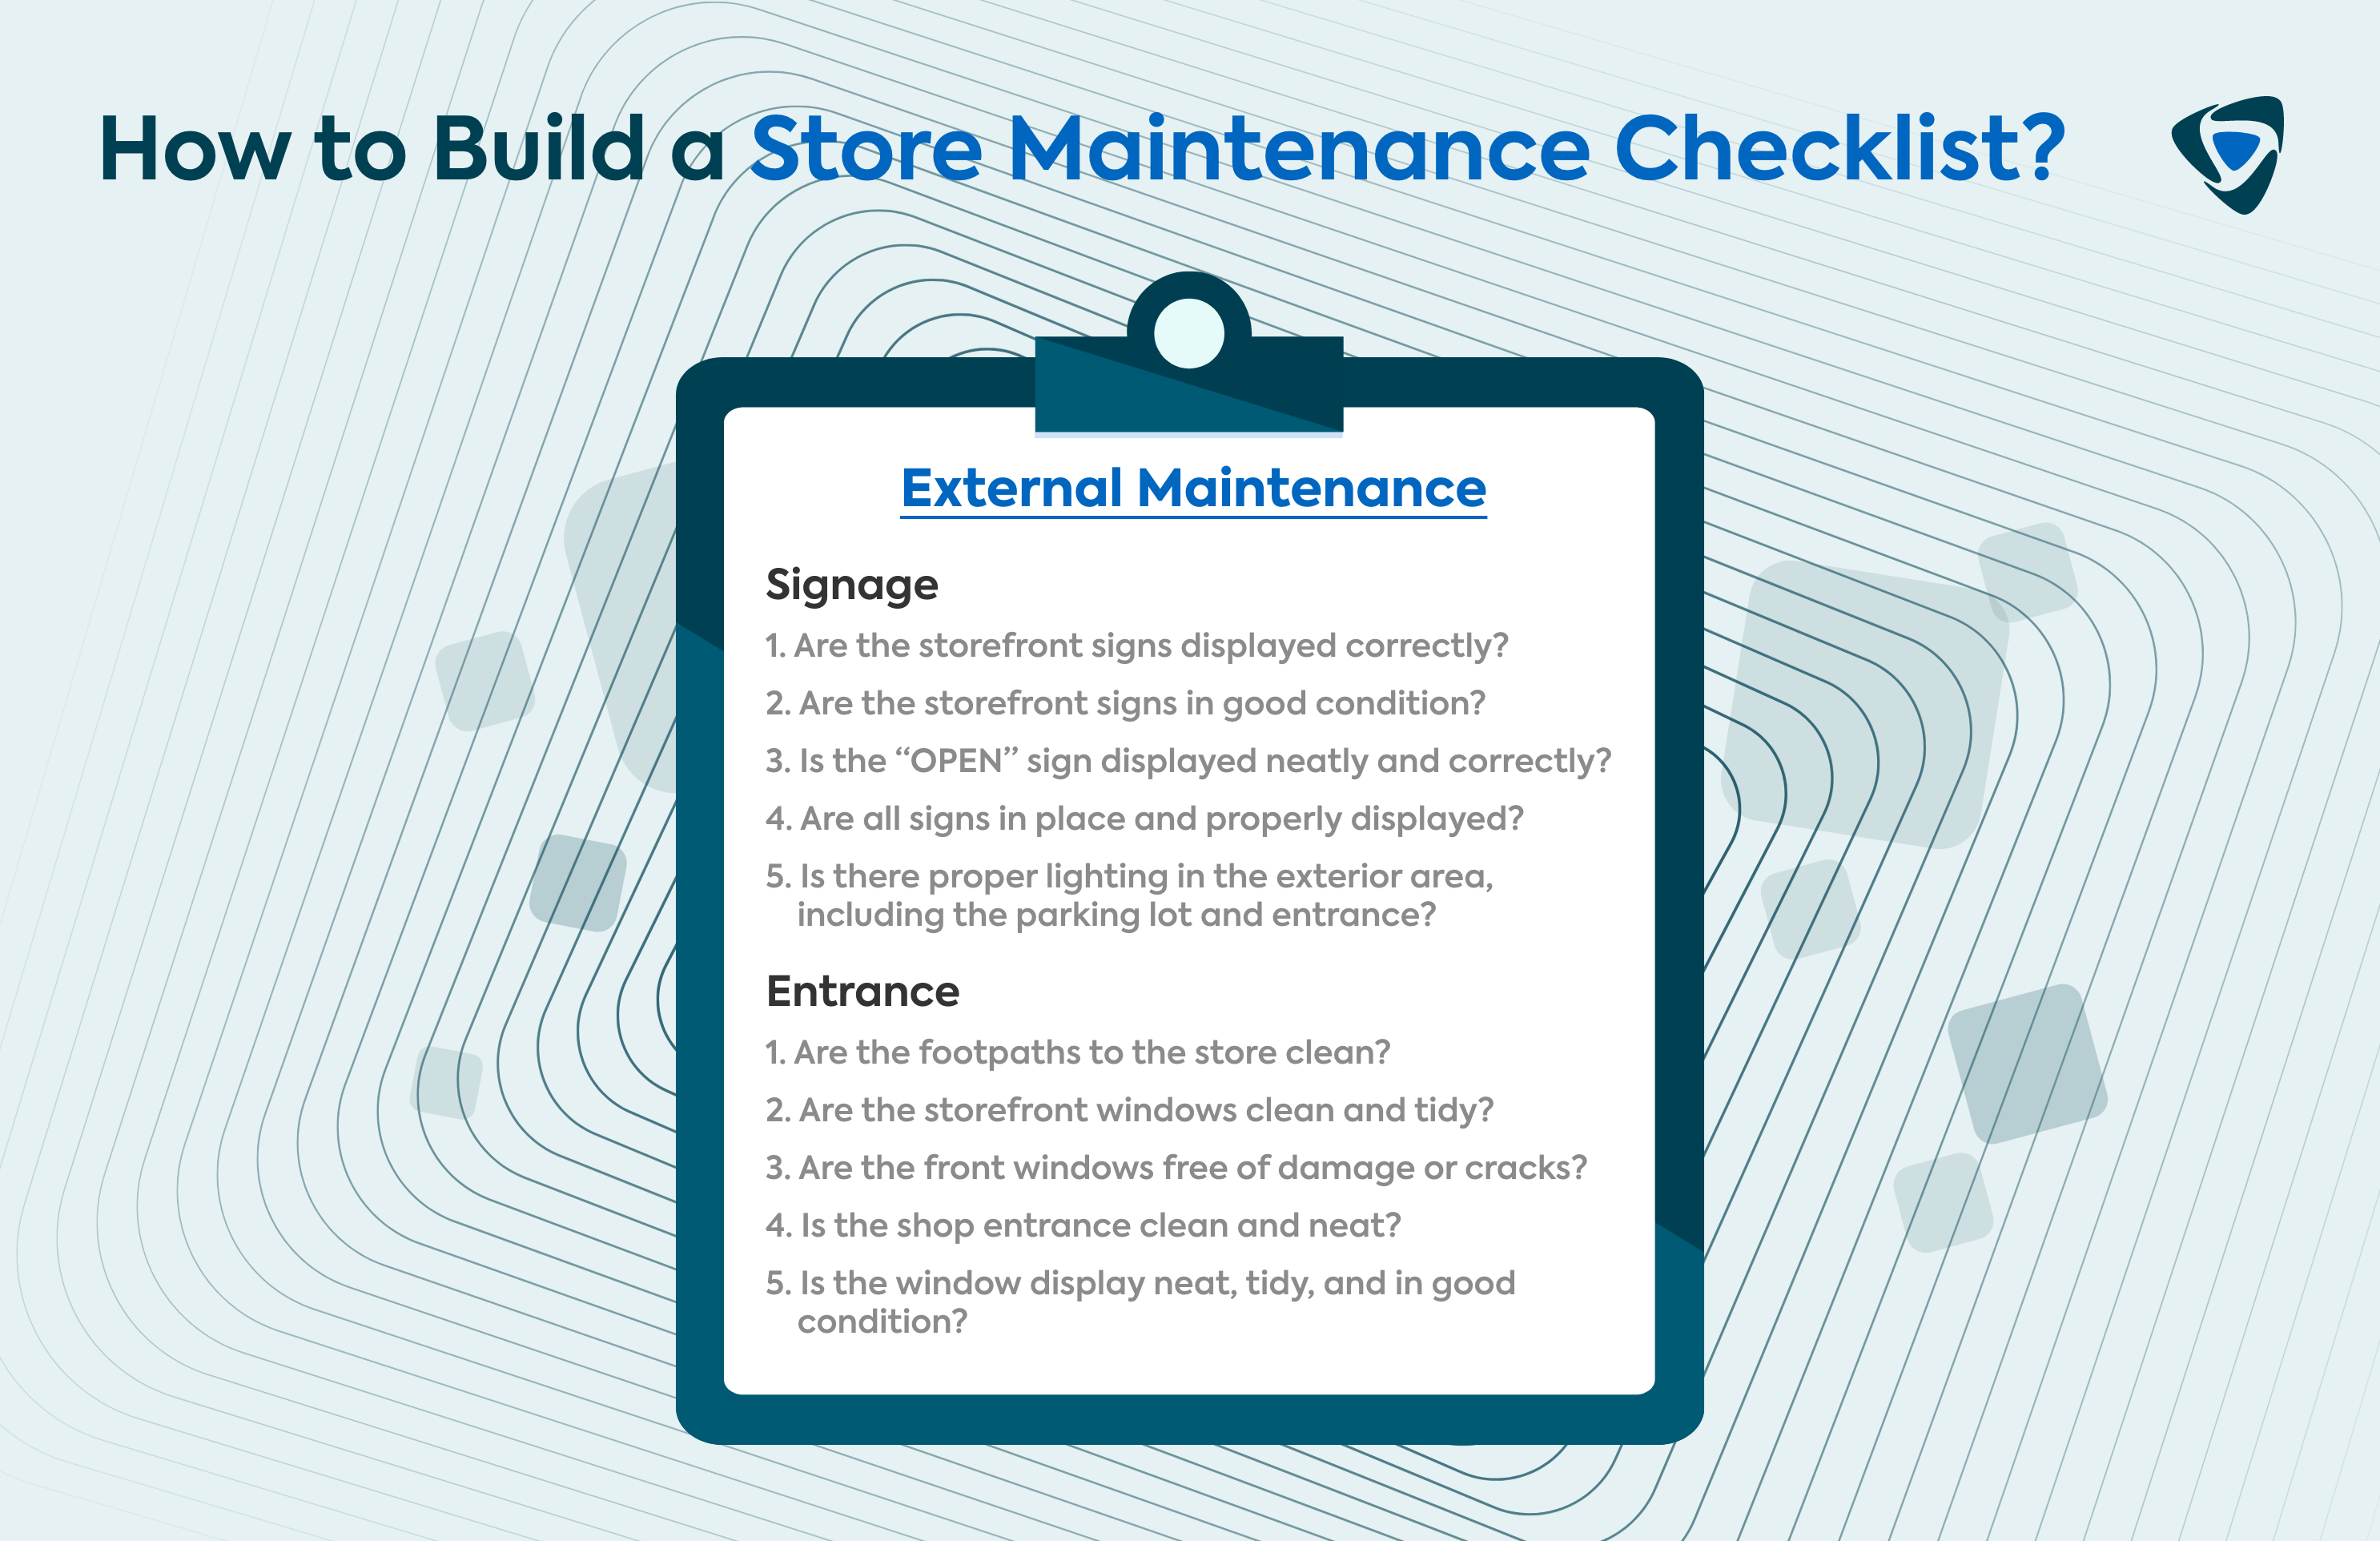 How to Build a Store Maintenance Checklist?